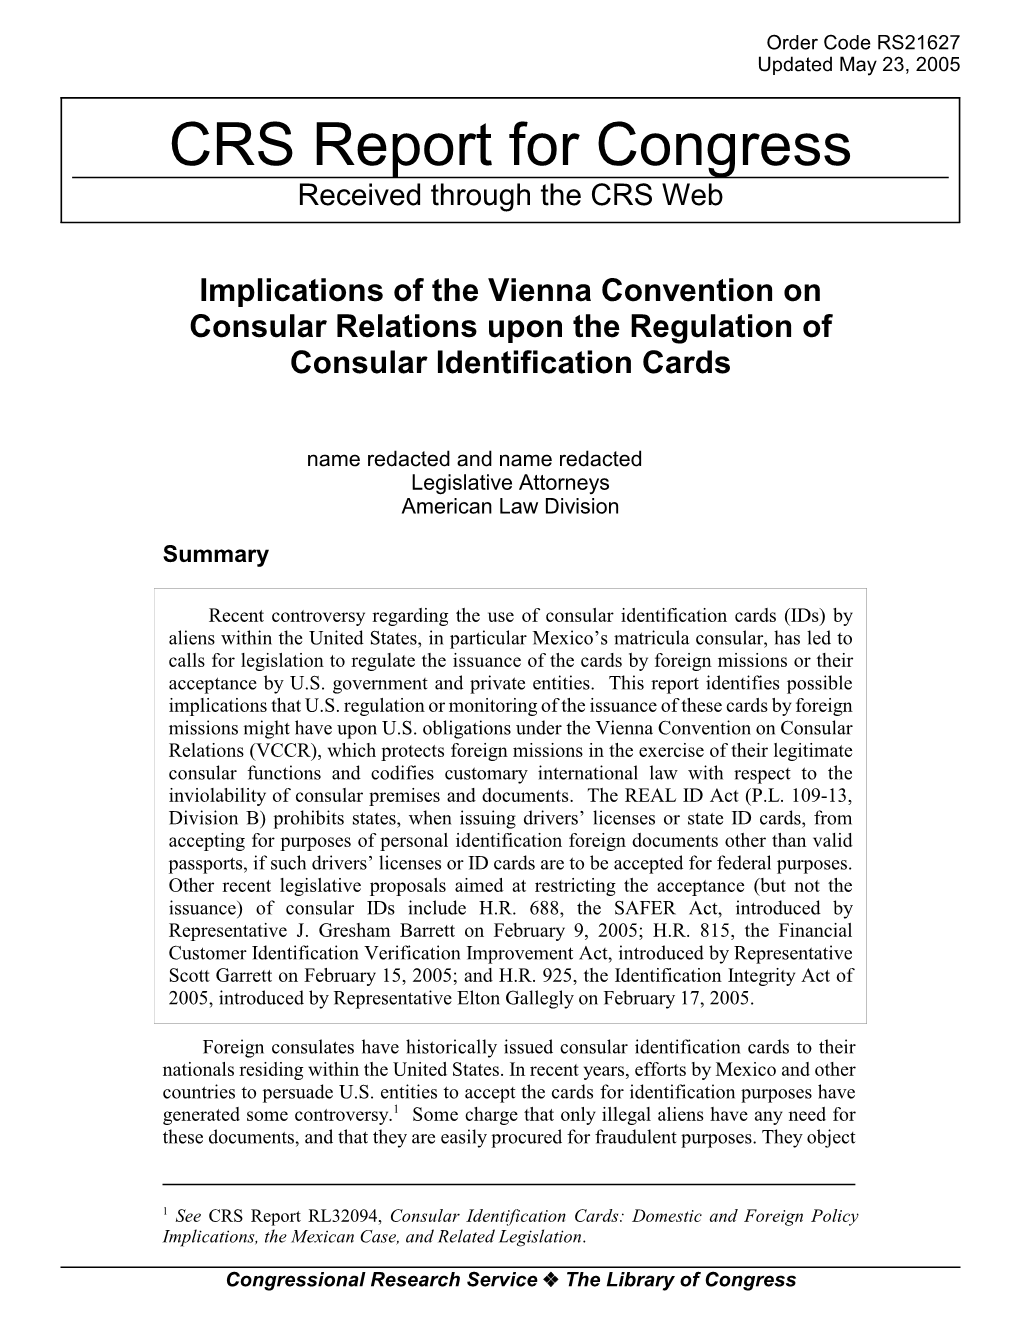 Implications of the Vienna Convention on Consular Relations Upon the Regulation of Consular Identification Cards